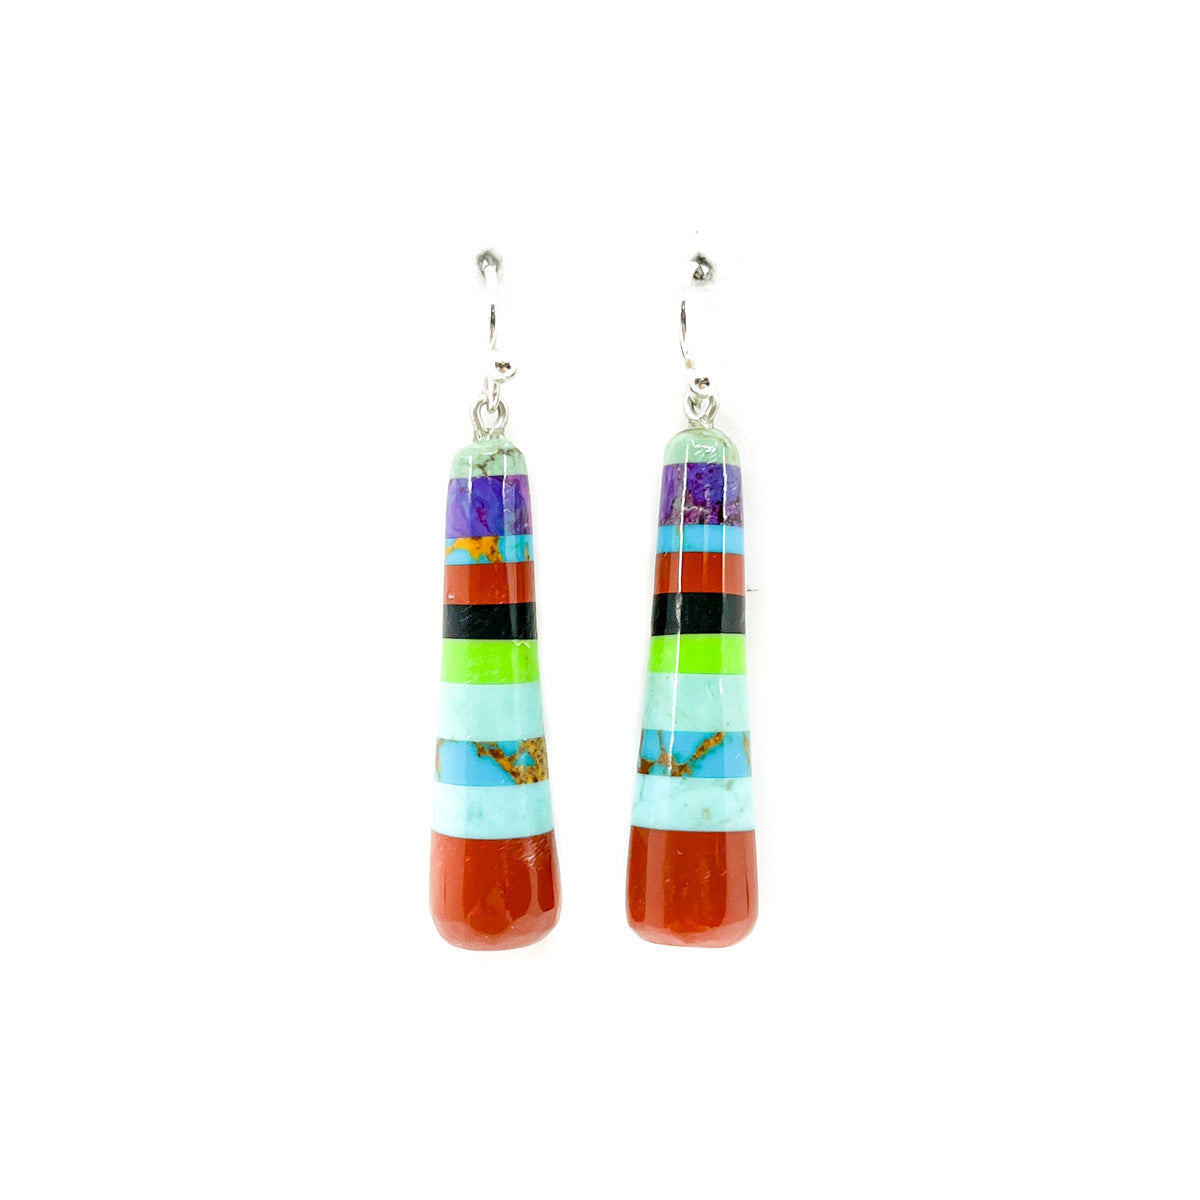 Hand crafted by Santo Domingo Pueblo artist Ronald Chavez Lightweight, stacked multicolor slab earrings Sterling silver French hooks Earrings are approximately 1.5 inches long, tapered, and dangle from earlobe approximately 1.75 inches